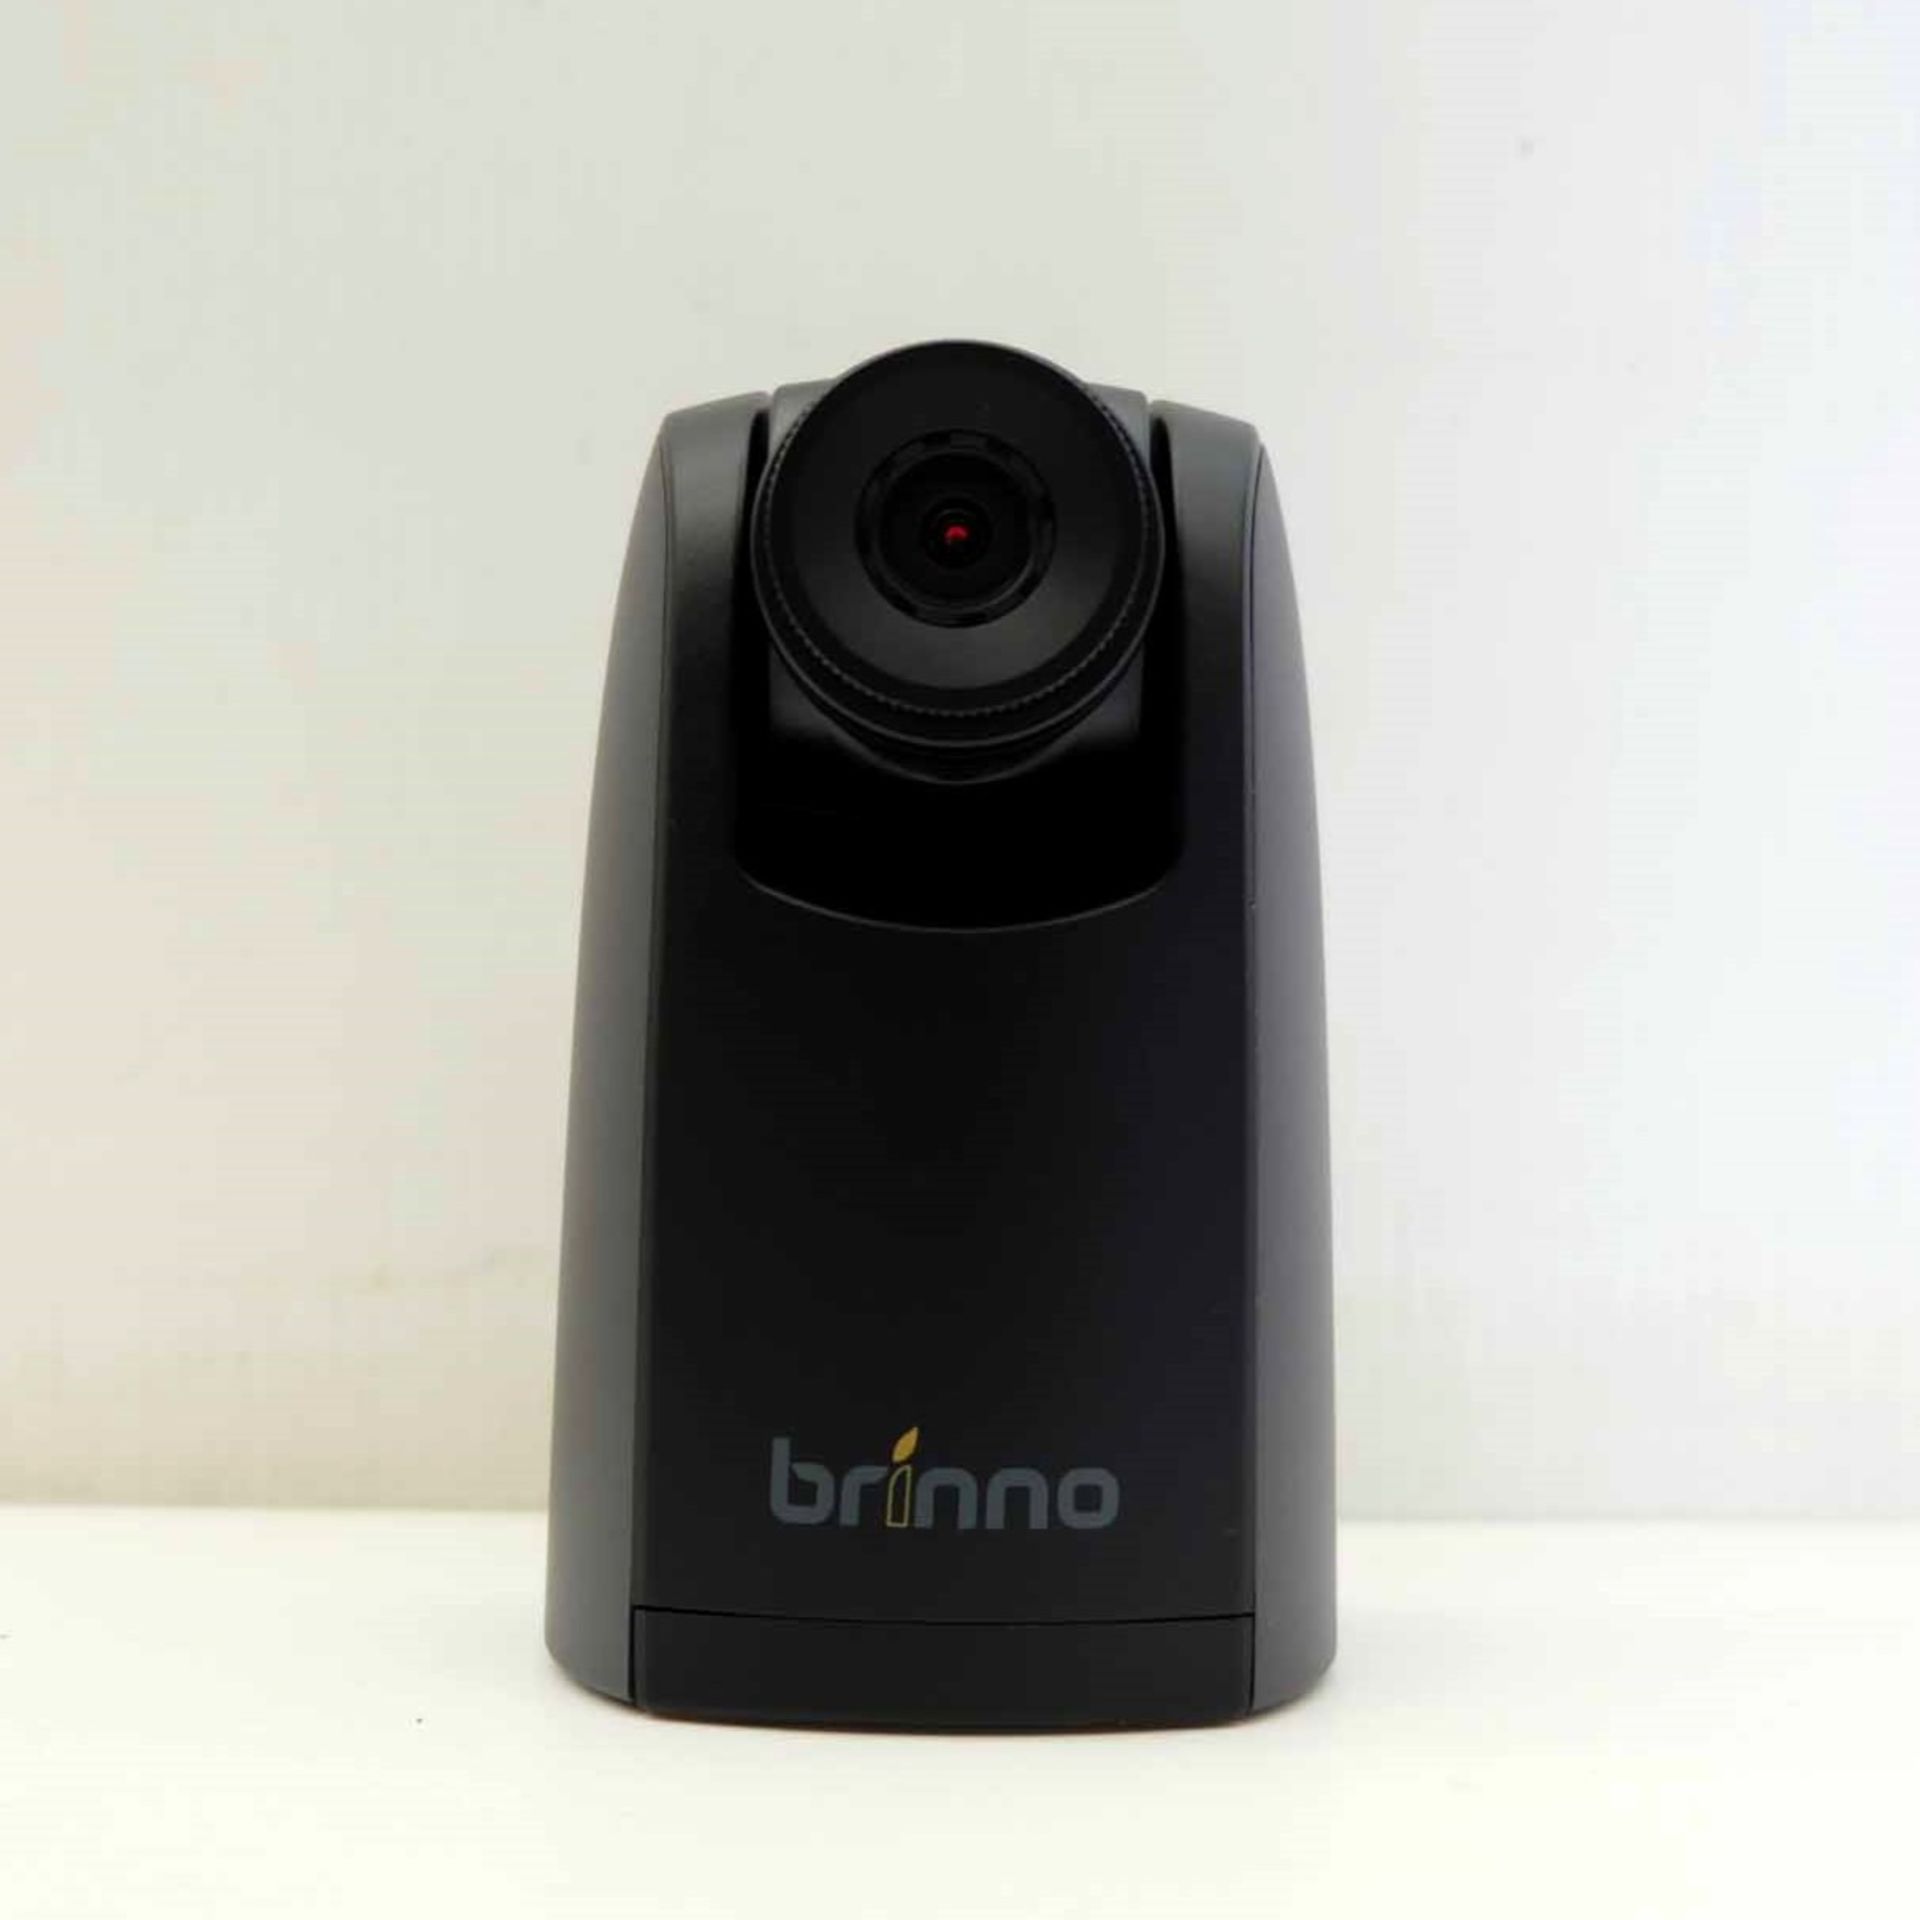 Brinno TLC200Pro Time Lapse Camera. In Waterproof Protective Case. Battery Operated. - Image 5 of 7